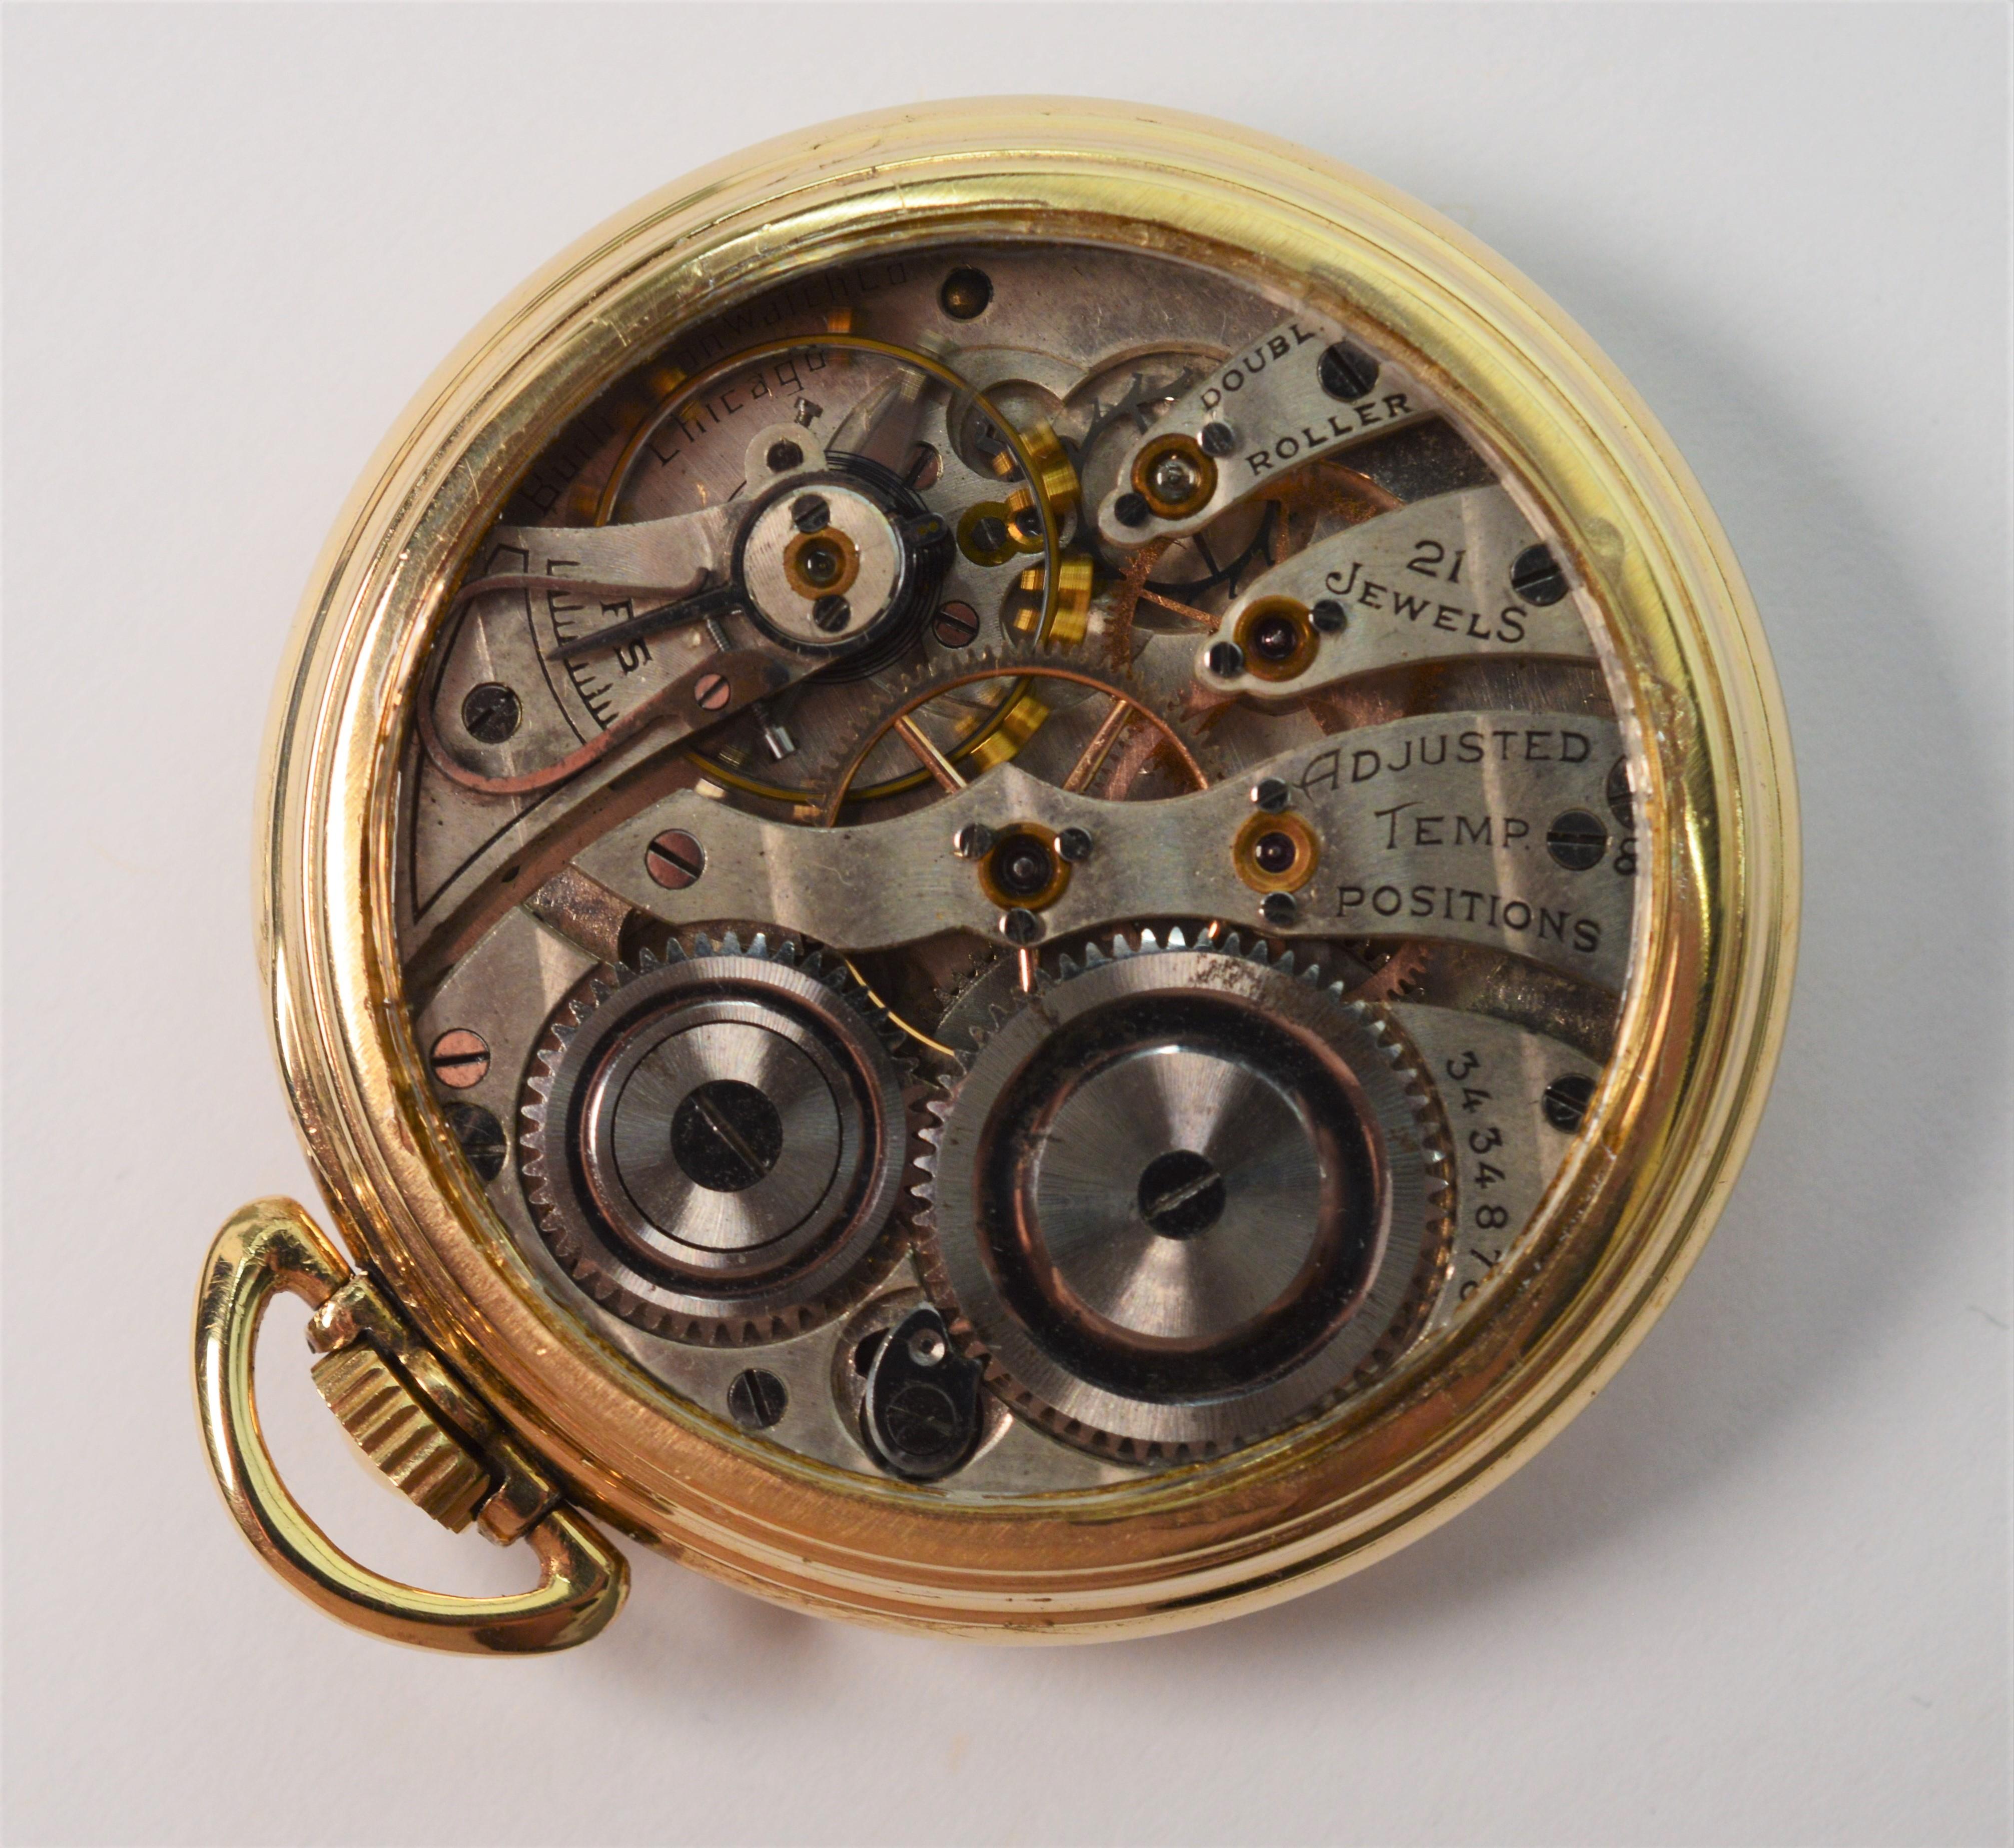 This sweet antique Illinois Watch Co. private label for Burlington Brass Pocket Watch, circa 1919 is converted to a skeleton watch with a glass display back for a mesmerizing view of its intricate twenty one  jeweled nickel movement with bridge